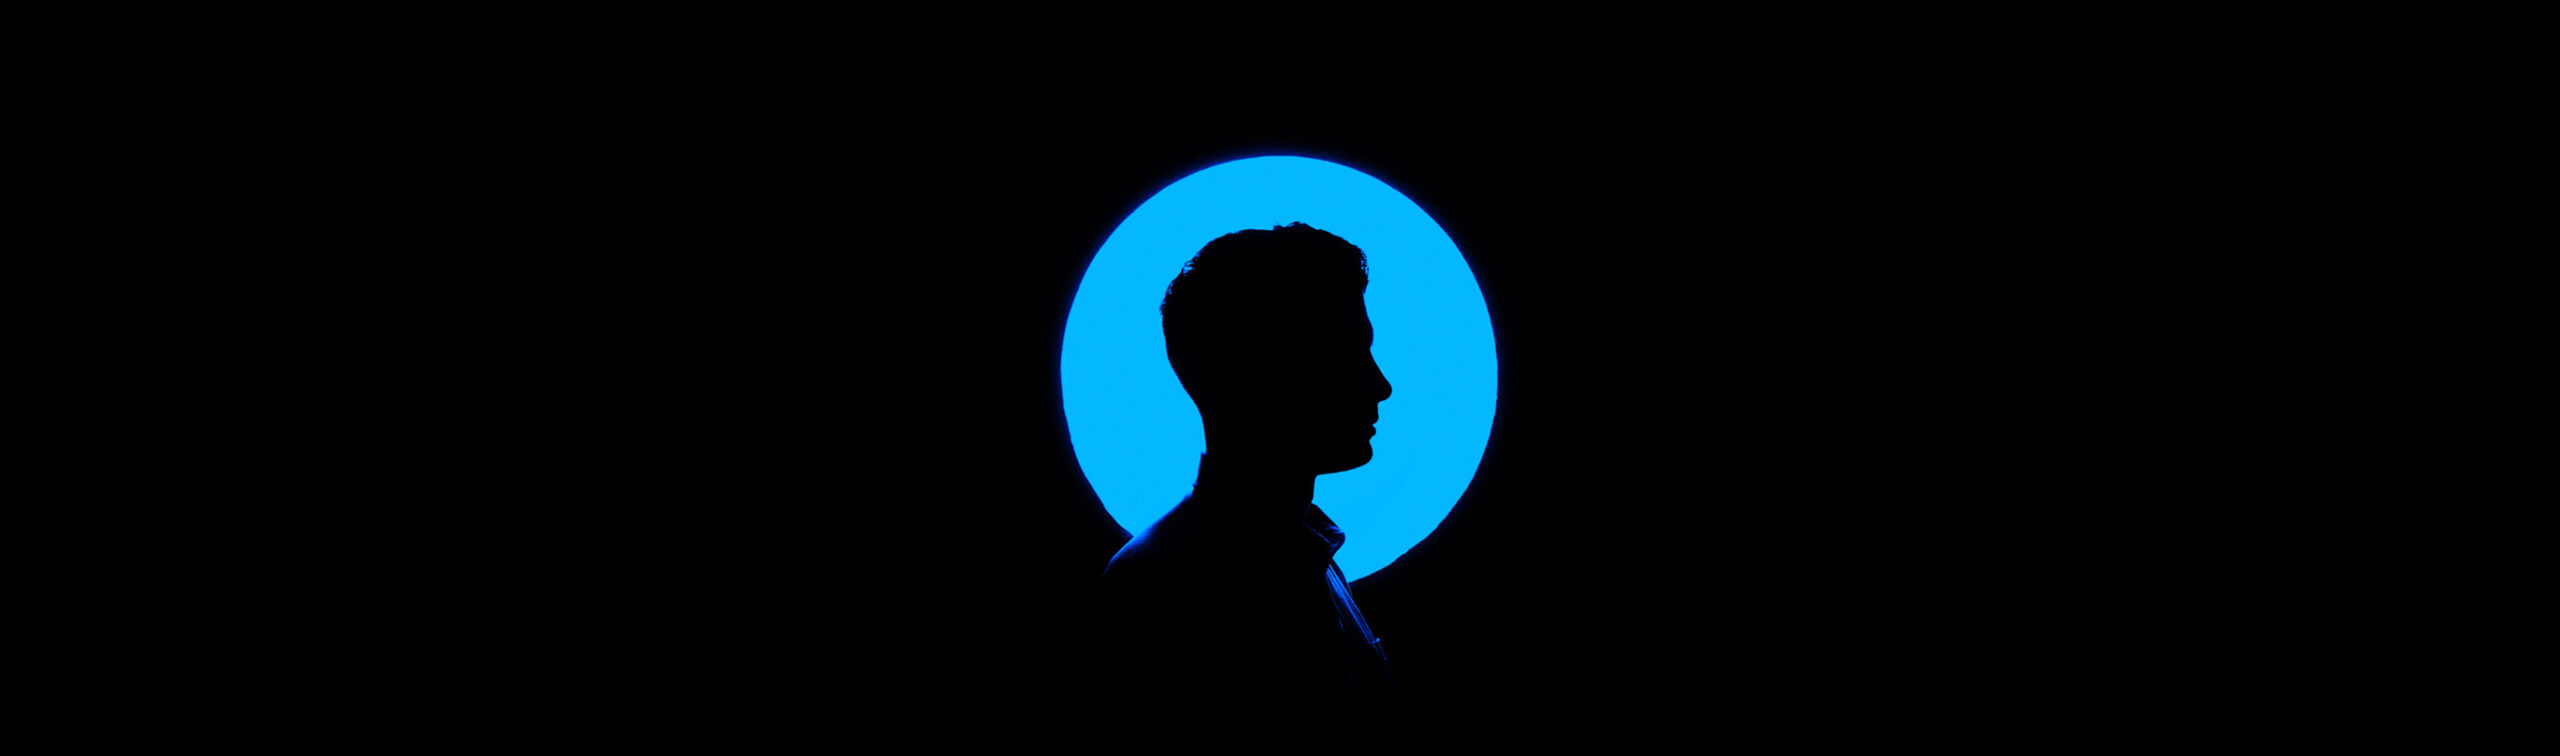 Dark silhouette of man in front of blue circle